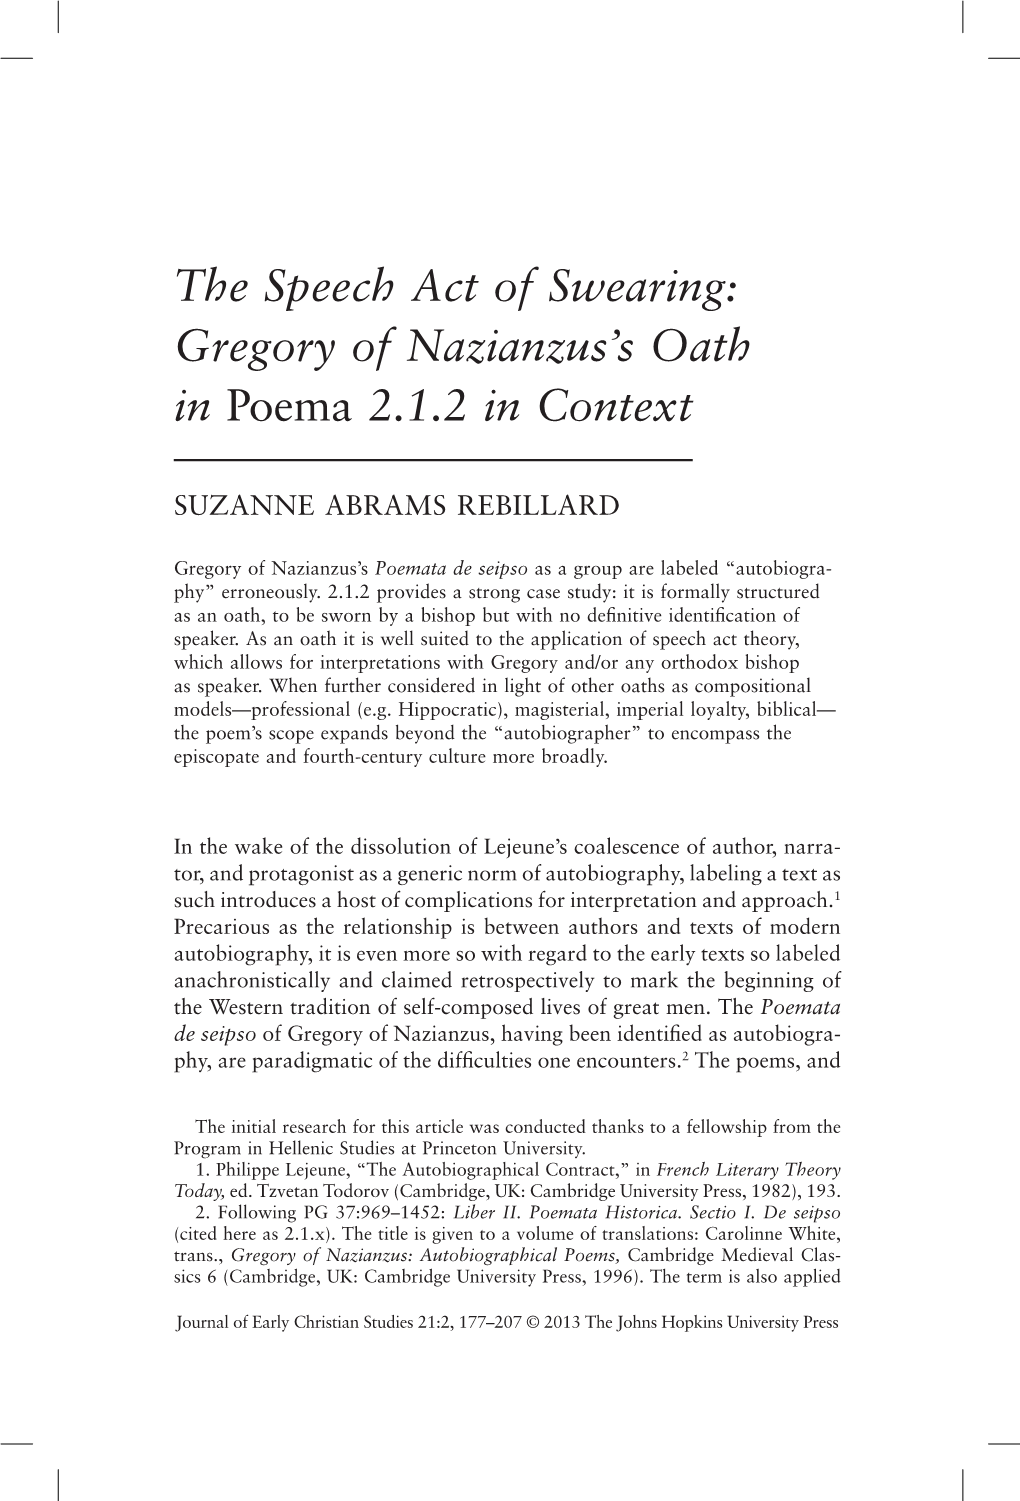 The Speech Act of Swearing: Gregory of Nazianzus's Oath in Poema 2.1.2